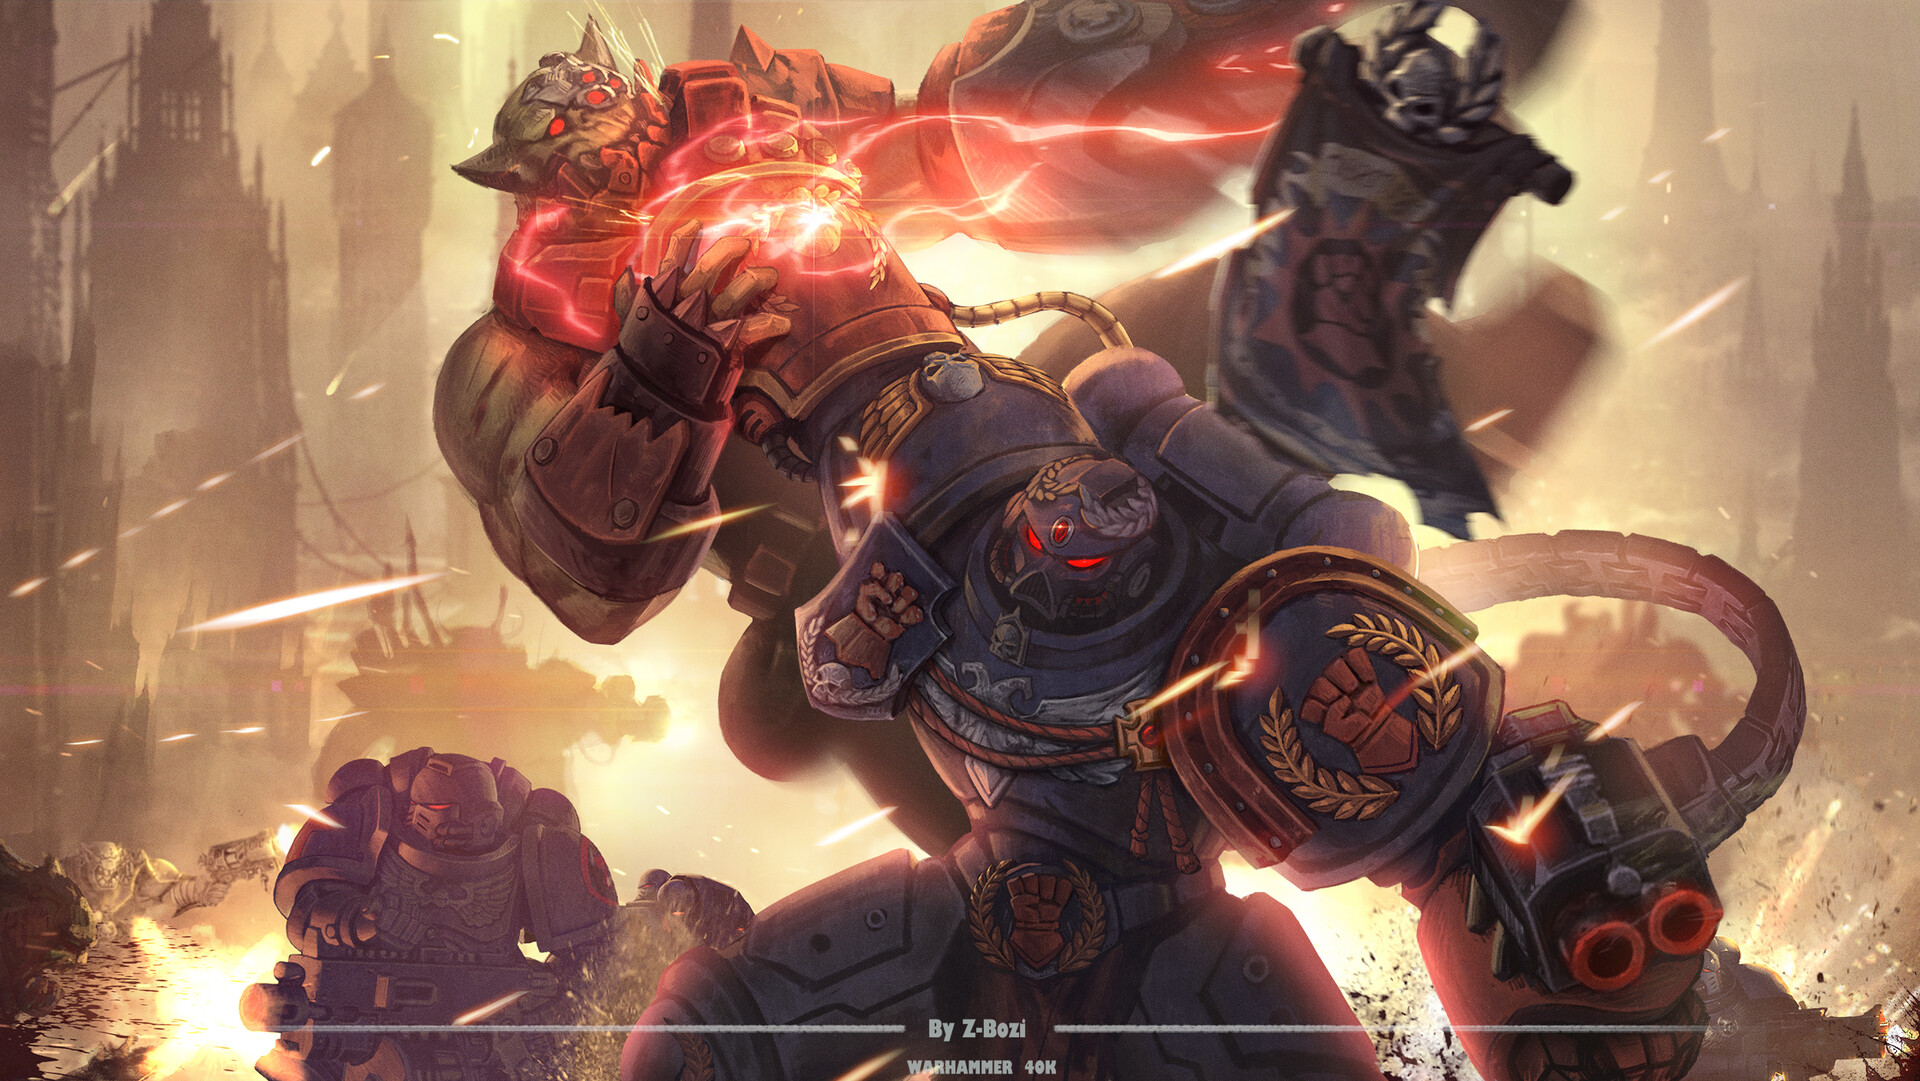 General 1920x1081 Space Marine Warhammer Warhammer 40,000 Warhammer 30,000 power armor weapon bolter ultramarine Robute Gilliman orcs red blue gold skull Science Fiction Men Imperium of Man fire science fiction gun video games video game characters